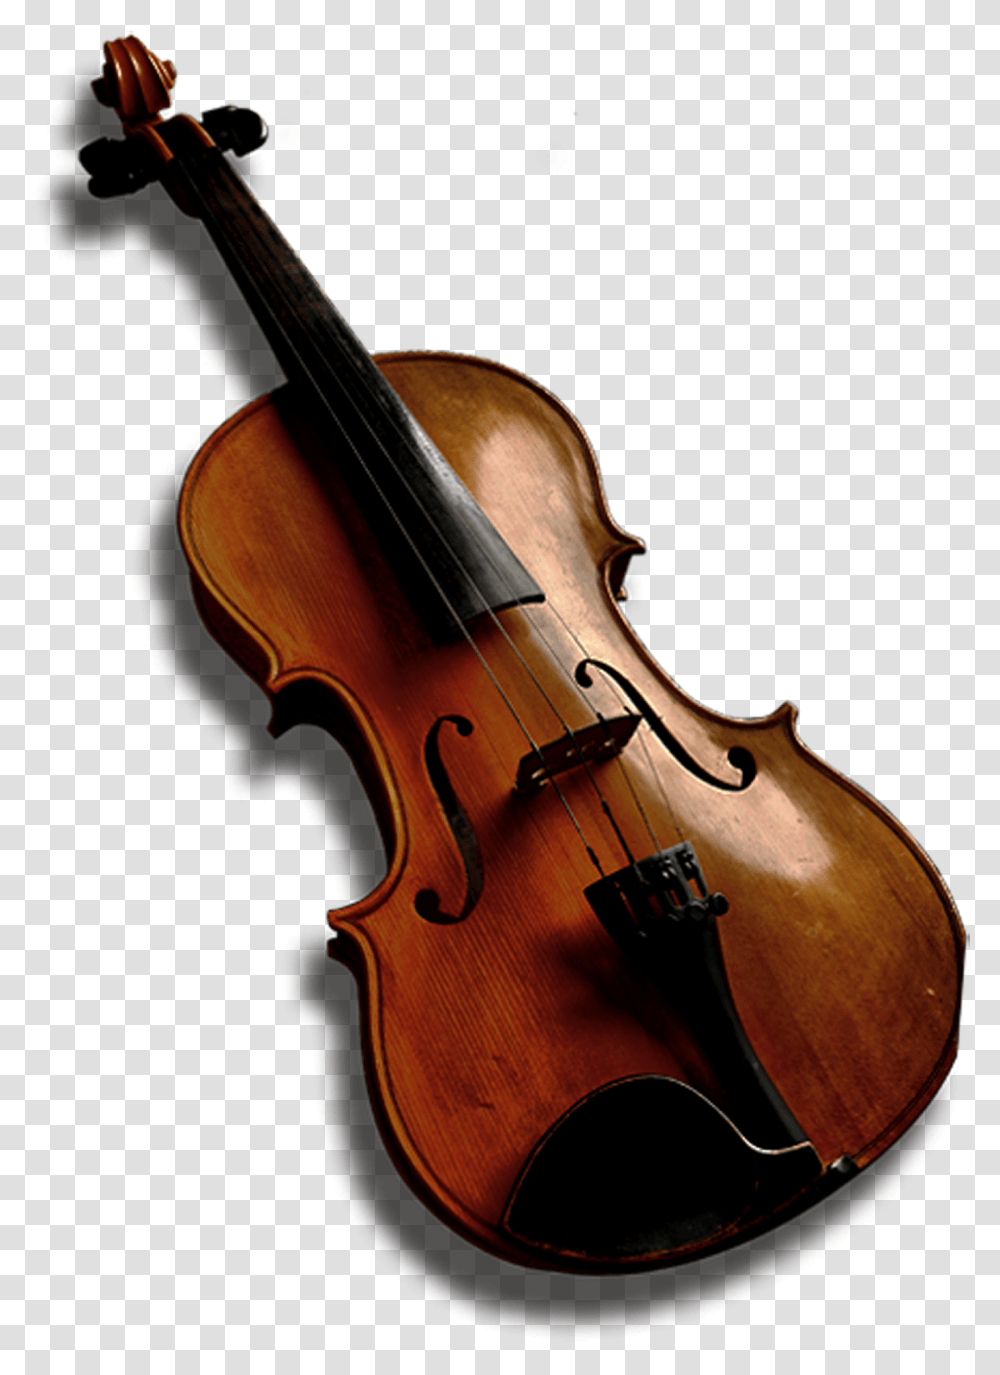 Bass Violin Viola Violone Double Bass Bass Violin, Leisure Activities, Musical Instrument, Fiddle, Cello Transparent Png